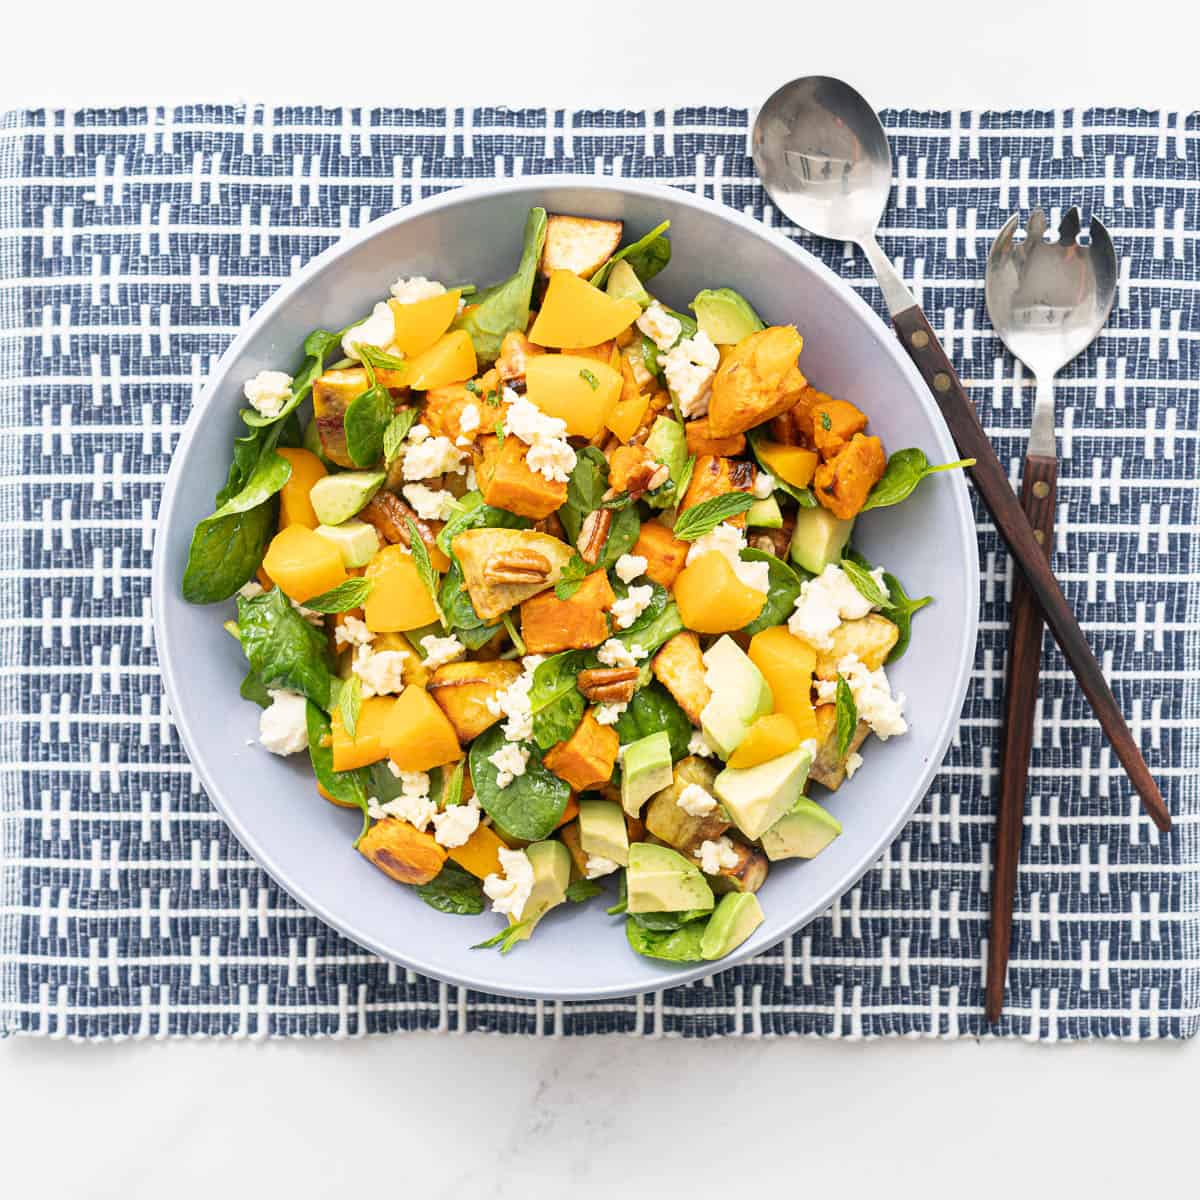 A large blue ceramic bowl of sweet potato and avocado salad on a blue and white woven placemat.